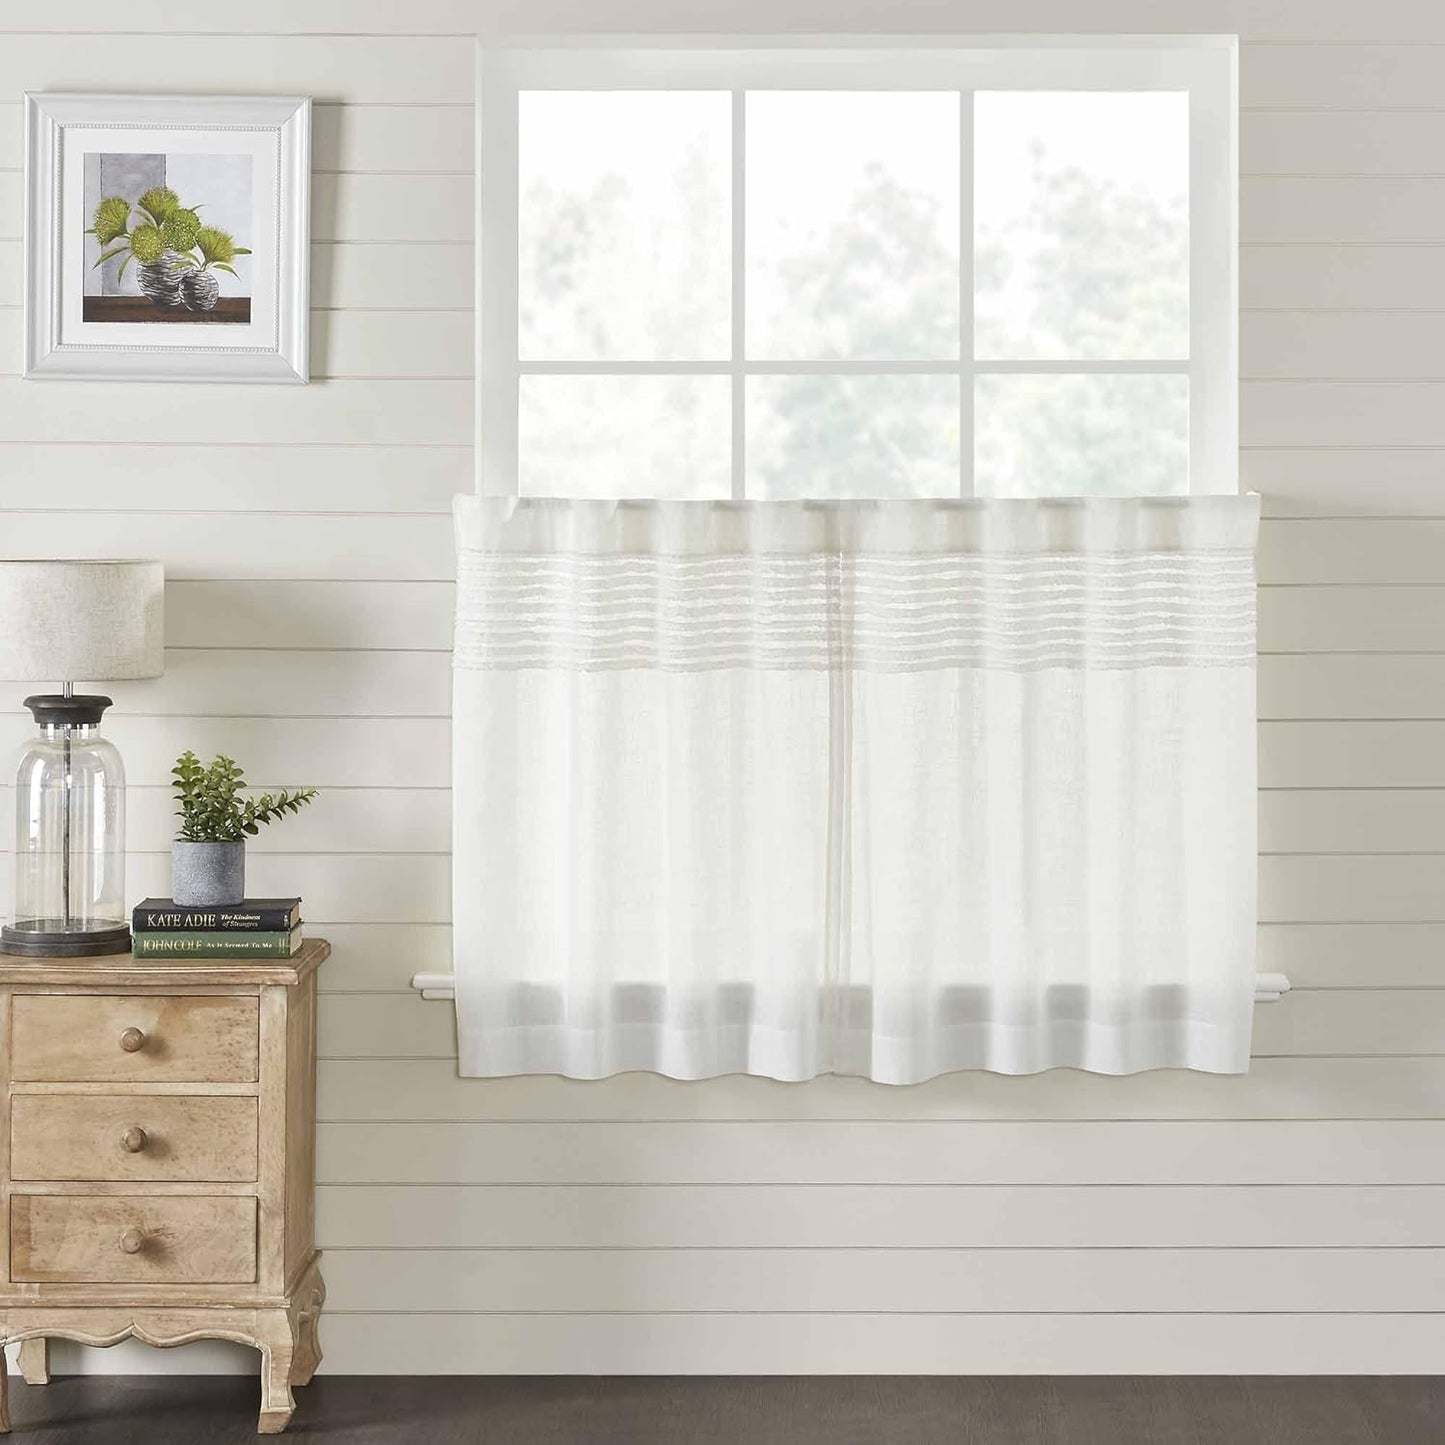 Kathryn Tier Curtains, Set of 2, 24" Long, Ruffled Curtains in a Linen-Look Soft White Cotton Semi-Sheer Fabric, Farmhouse, Cottage, Country Style Sheer Kitchen Café Curtains  Piper Classics 36" Tiers  